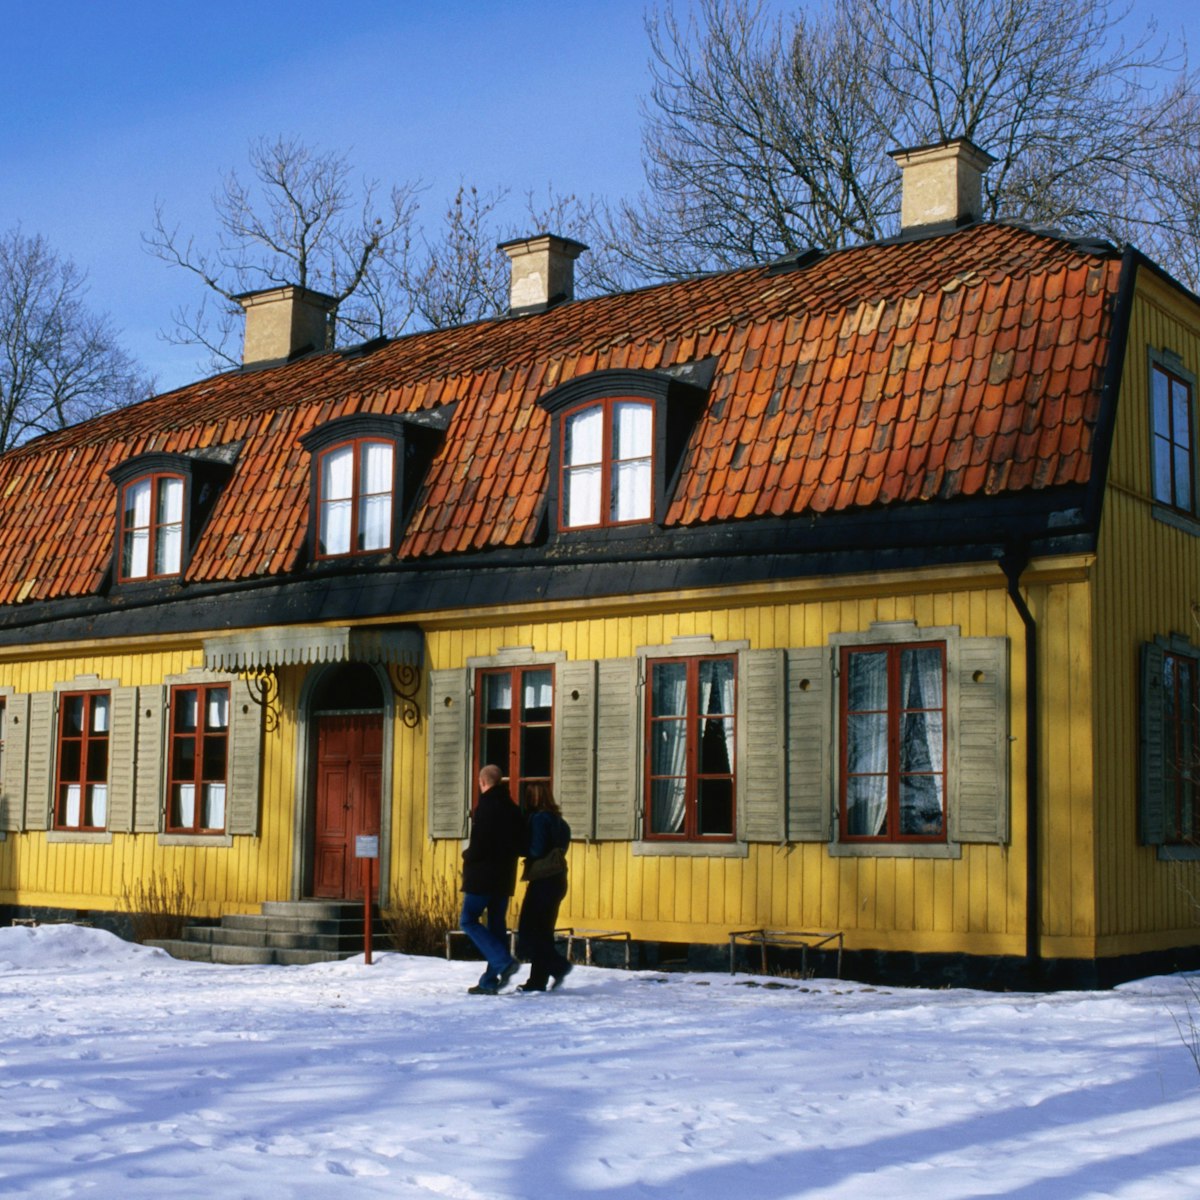 Traditional house in Skansen open-air museum.